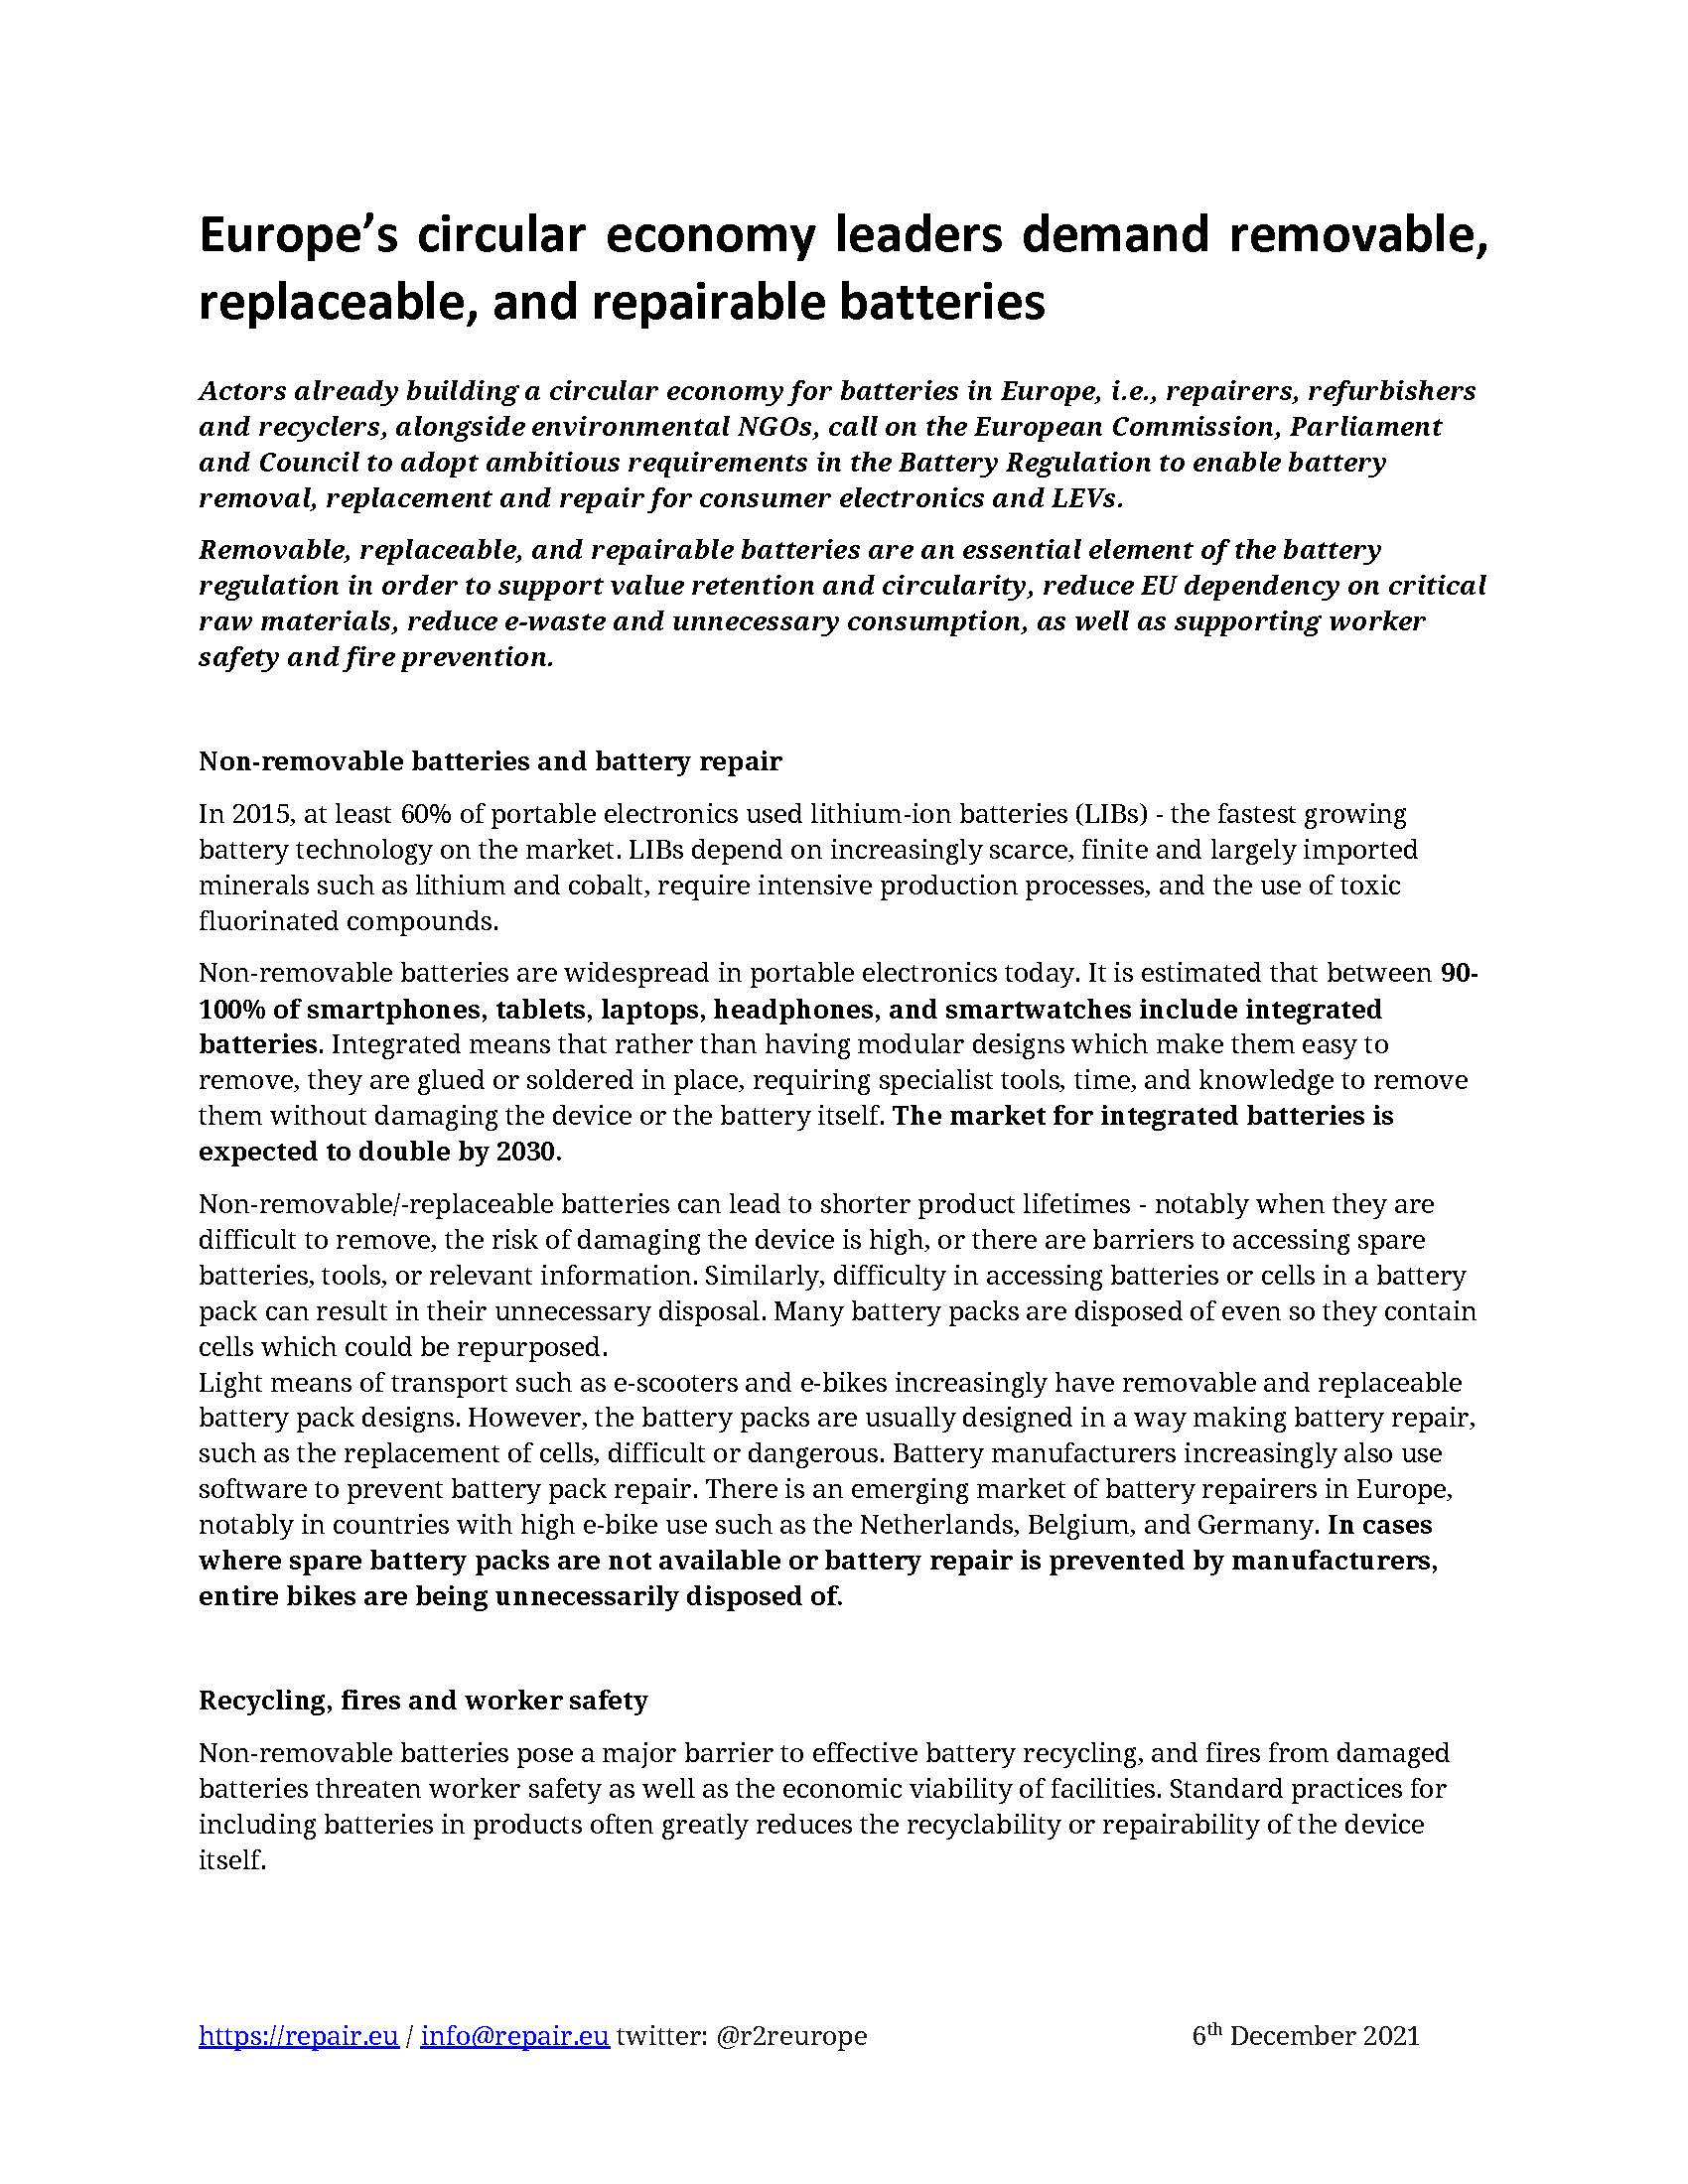 Joint Statement: Europe’s circular economy leaders demand removable, replaceable, and repairable batteries